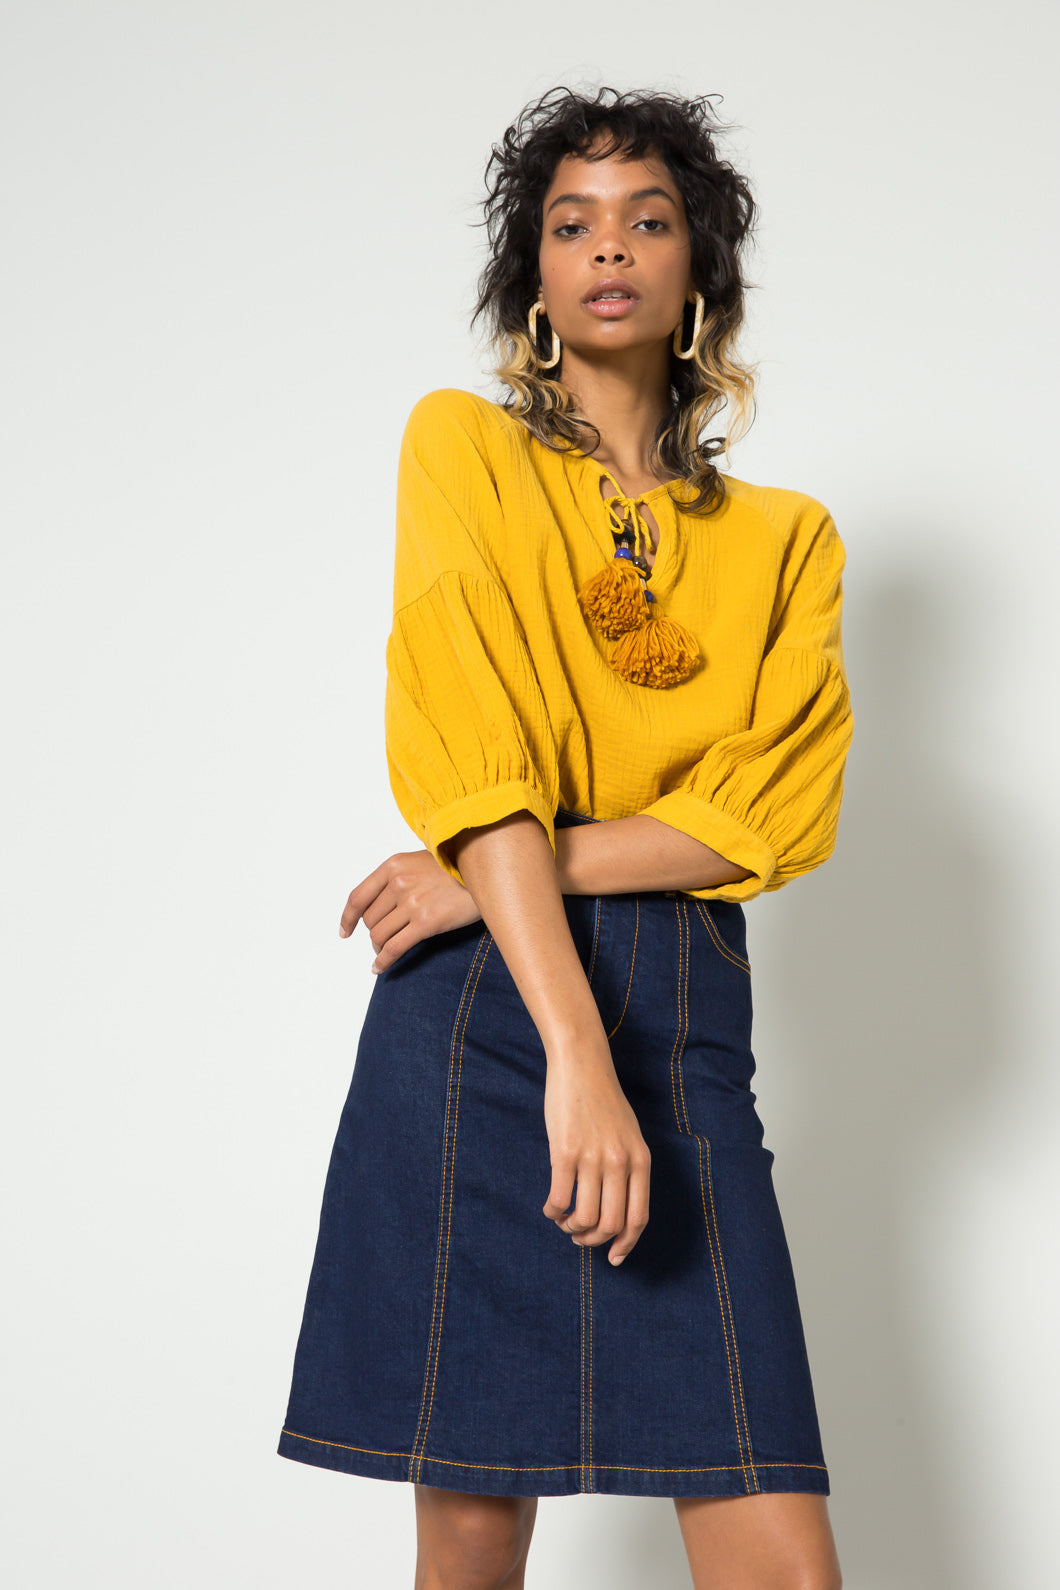 Mustard yellow corduroy skirt + navy polkadot blouse outfit. Fall outfit.